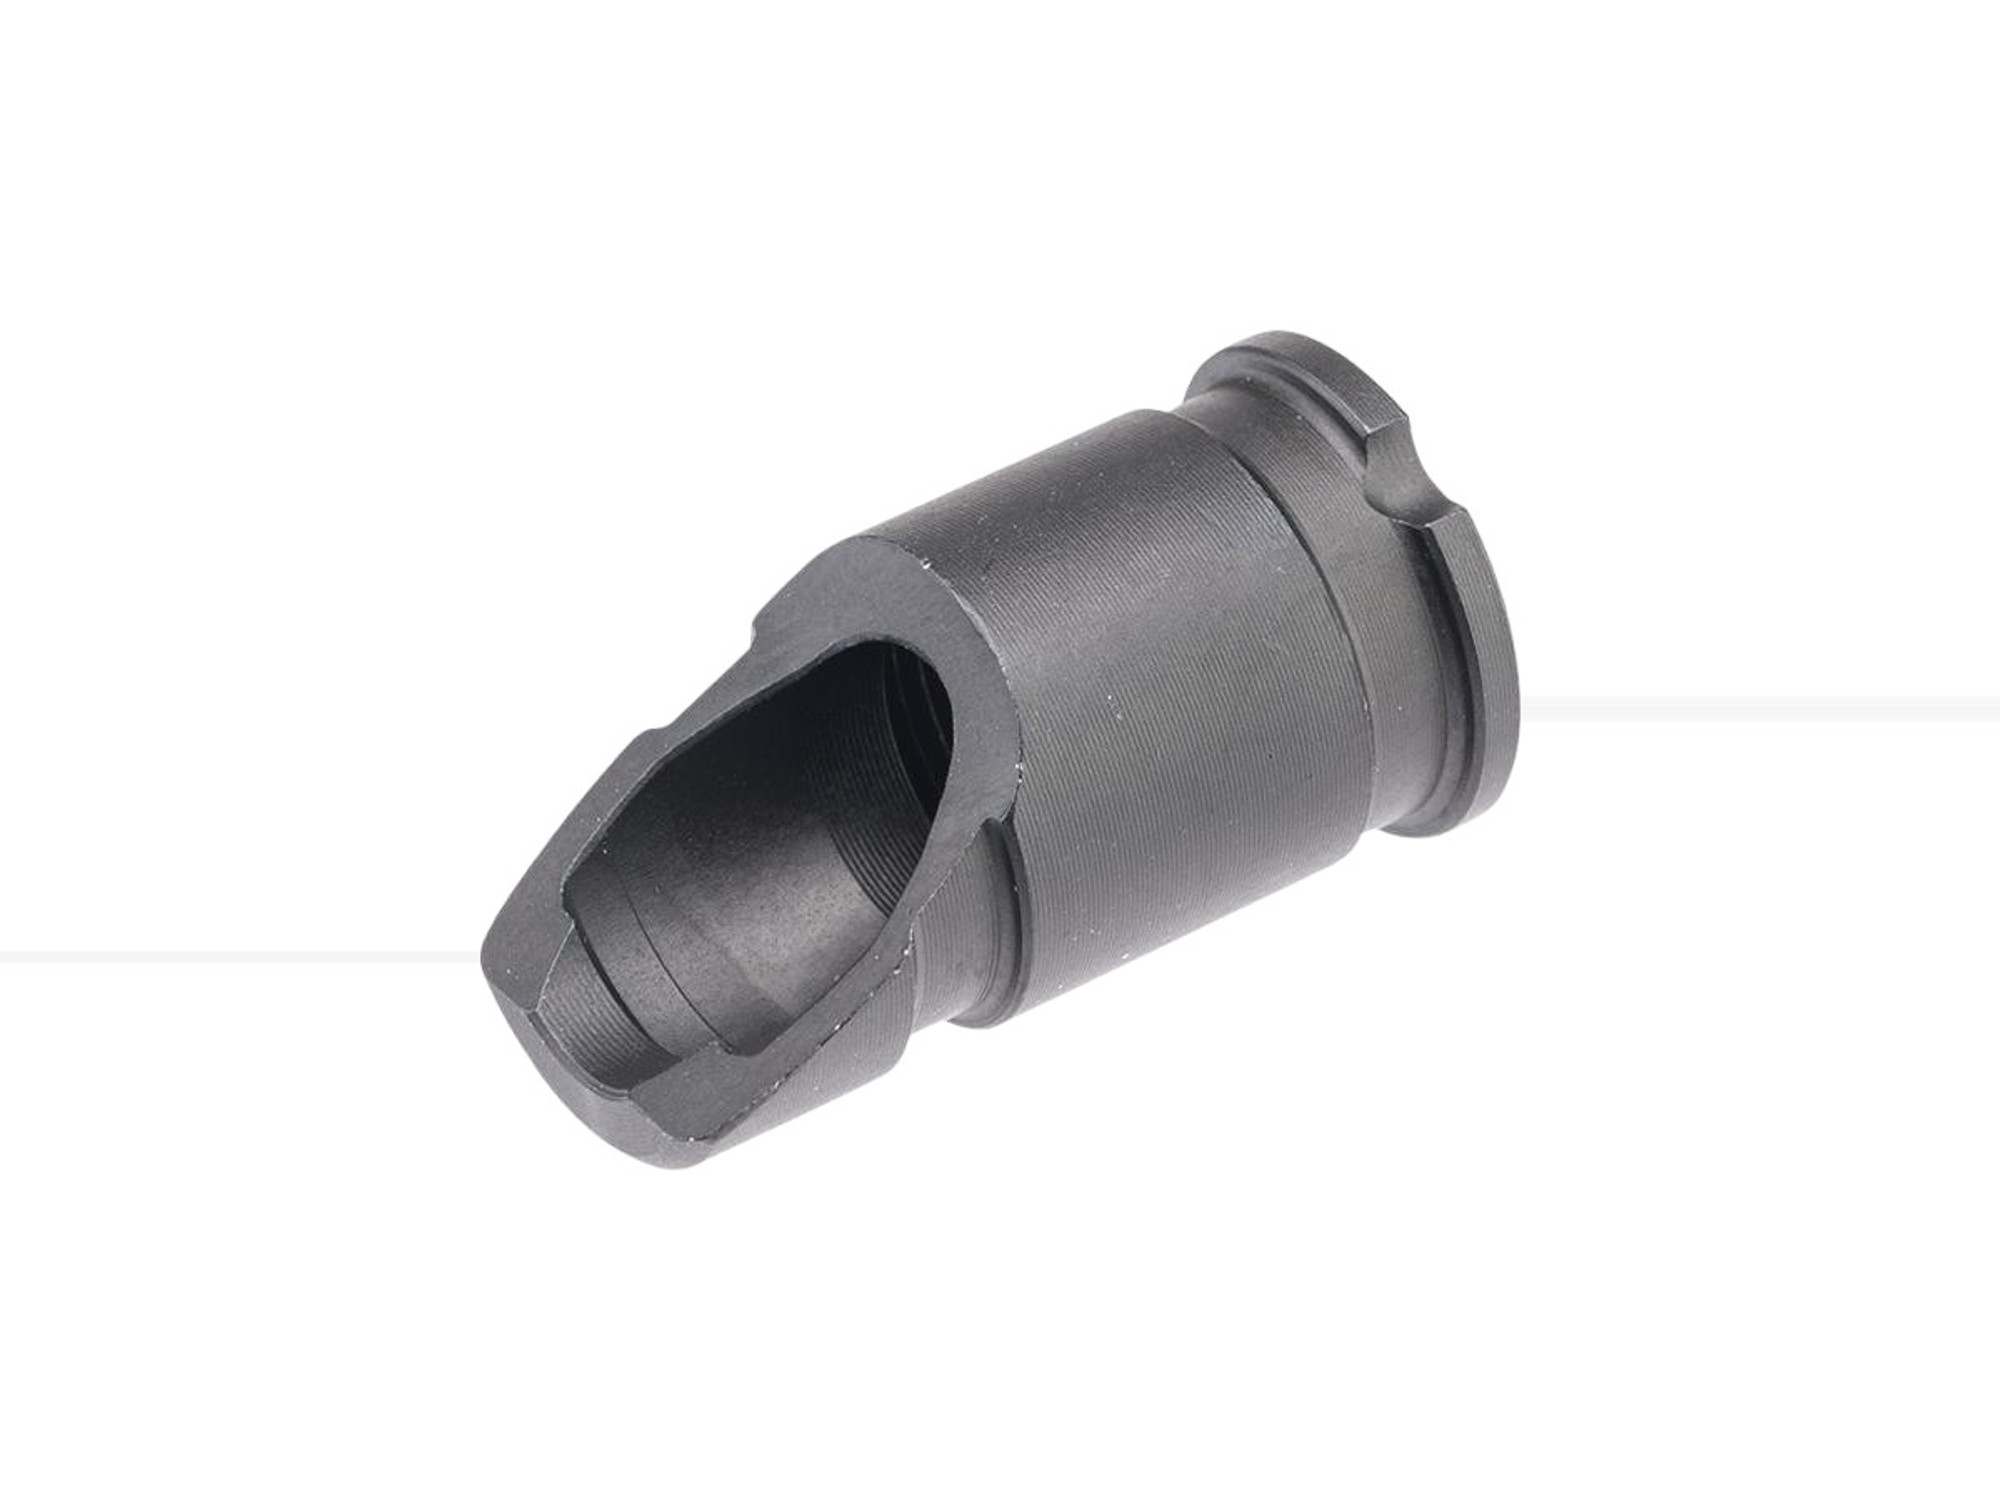 Double Bell Flash Hider for AKM Series Airsoft Rifles